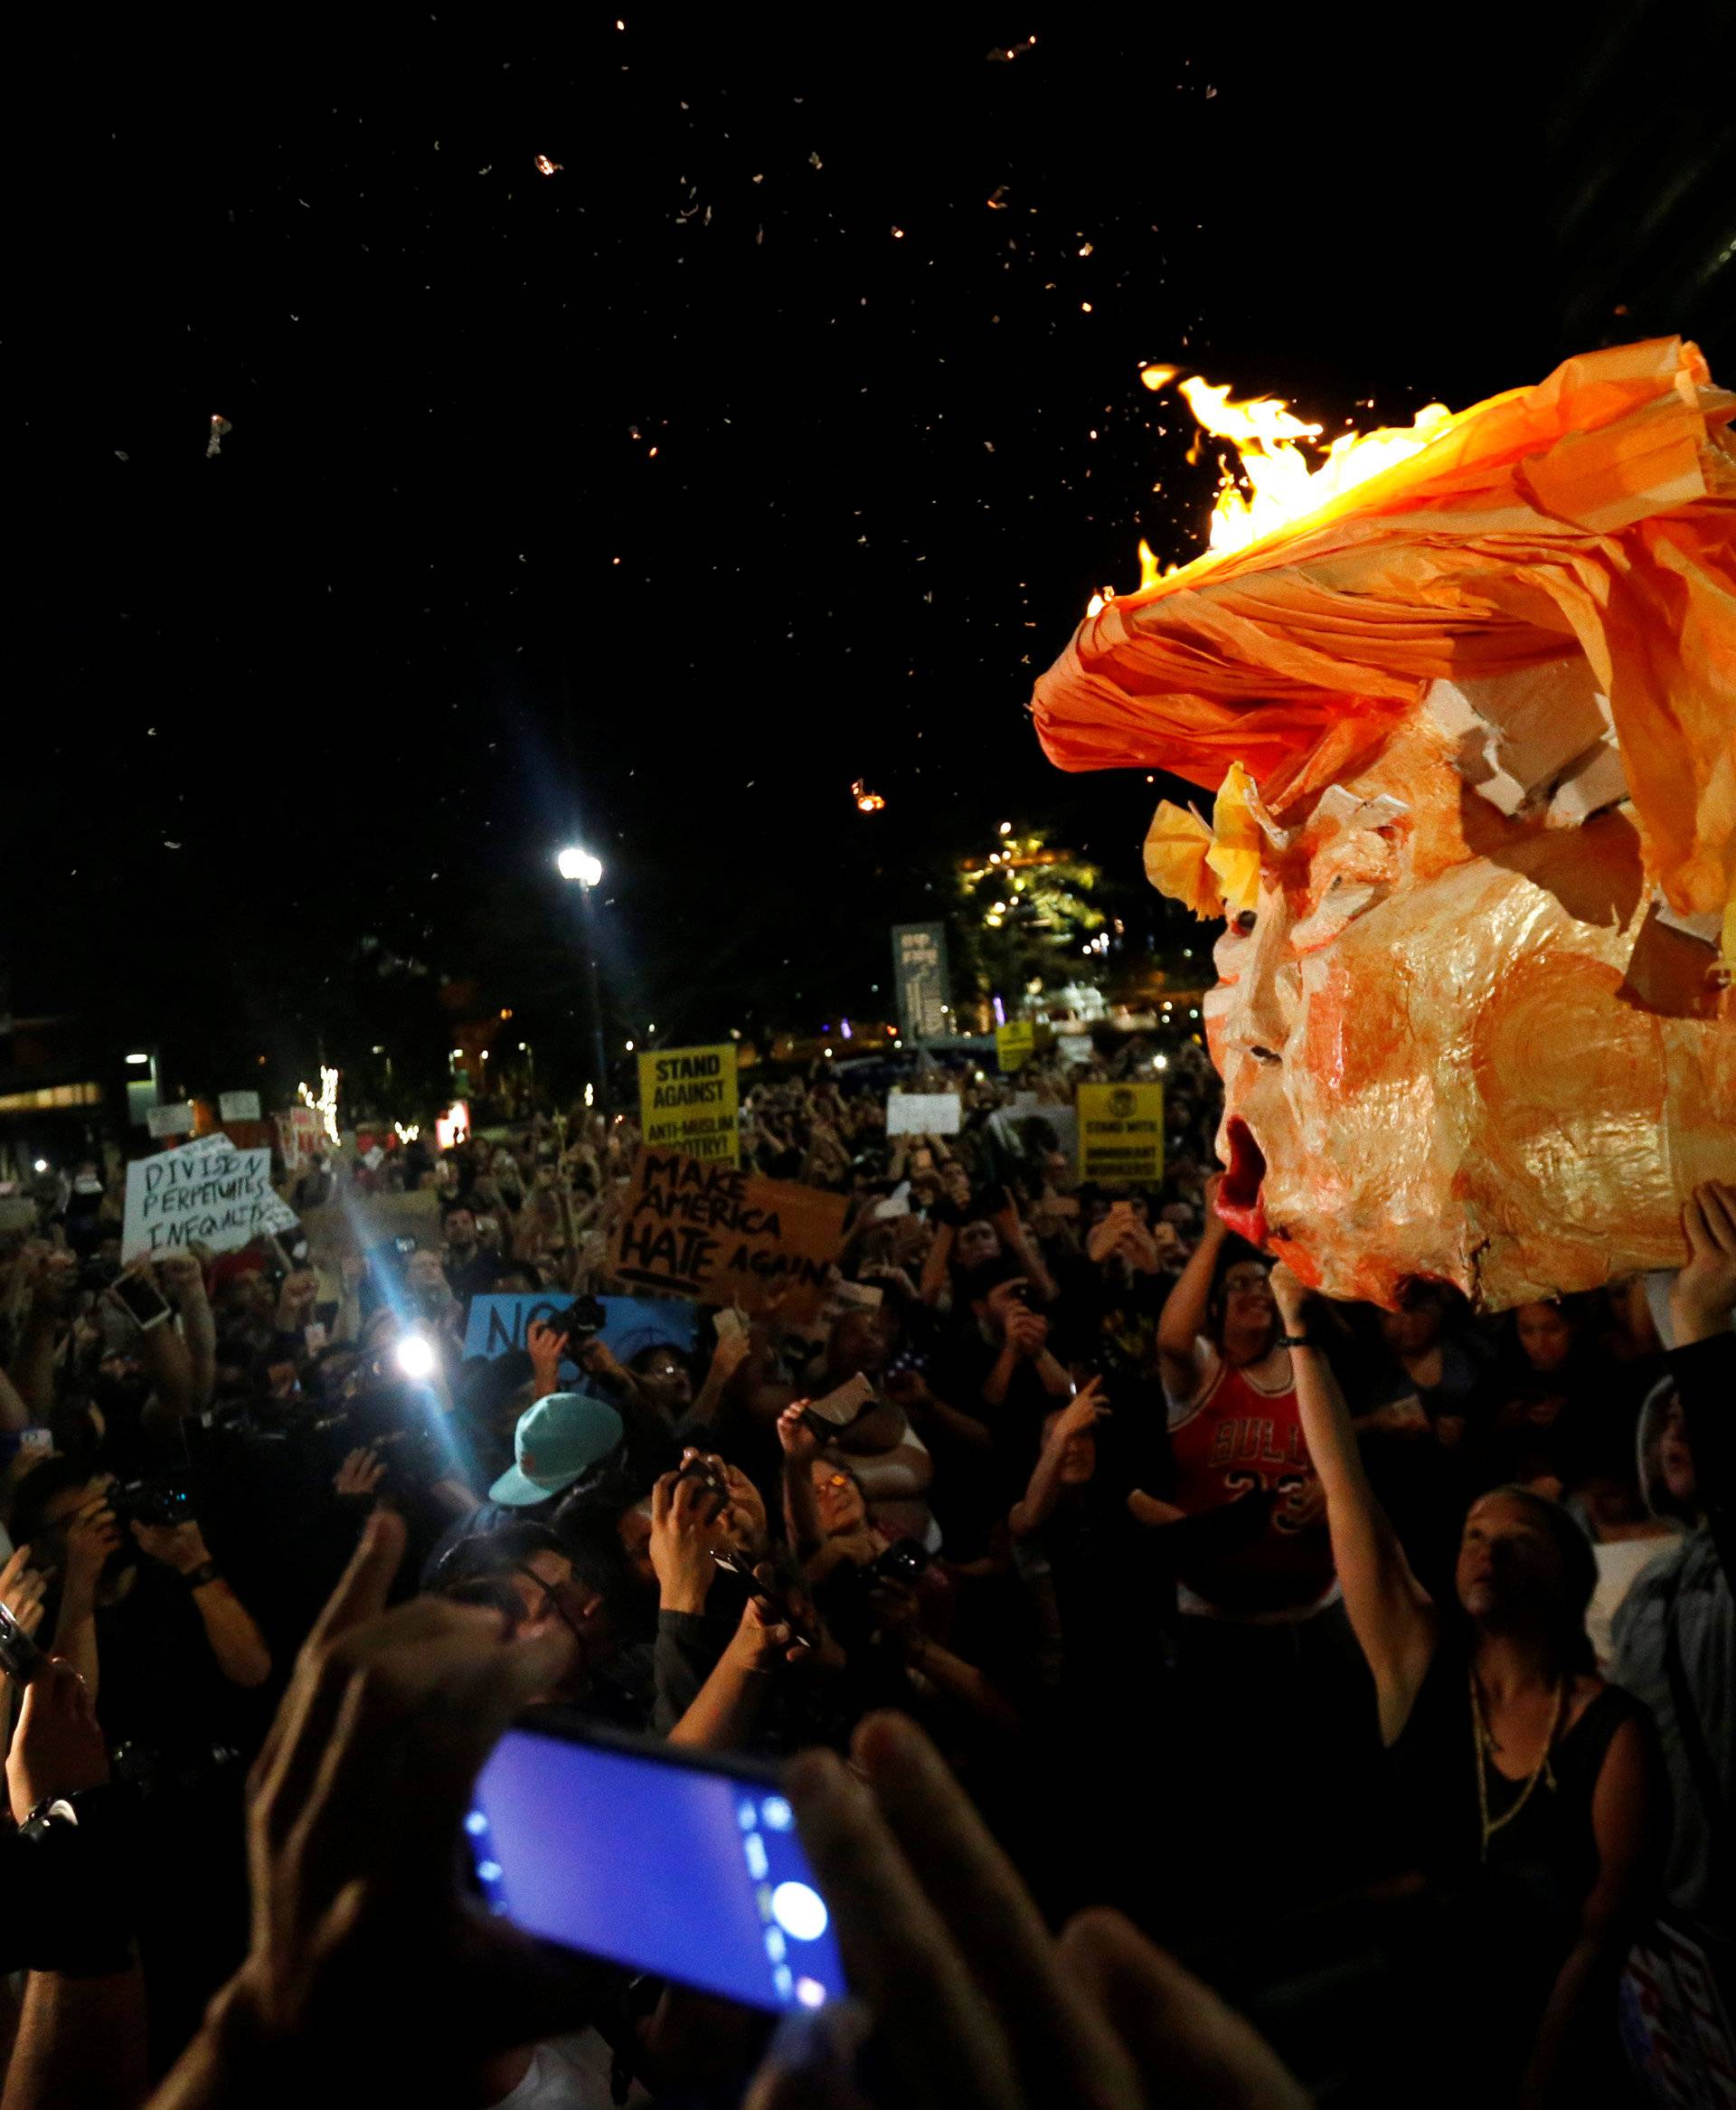 People hold a pinata which was lit on fire while protesting the election of Republican Donald Trump as the president of the United States in downtown Los Angeles